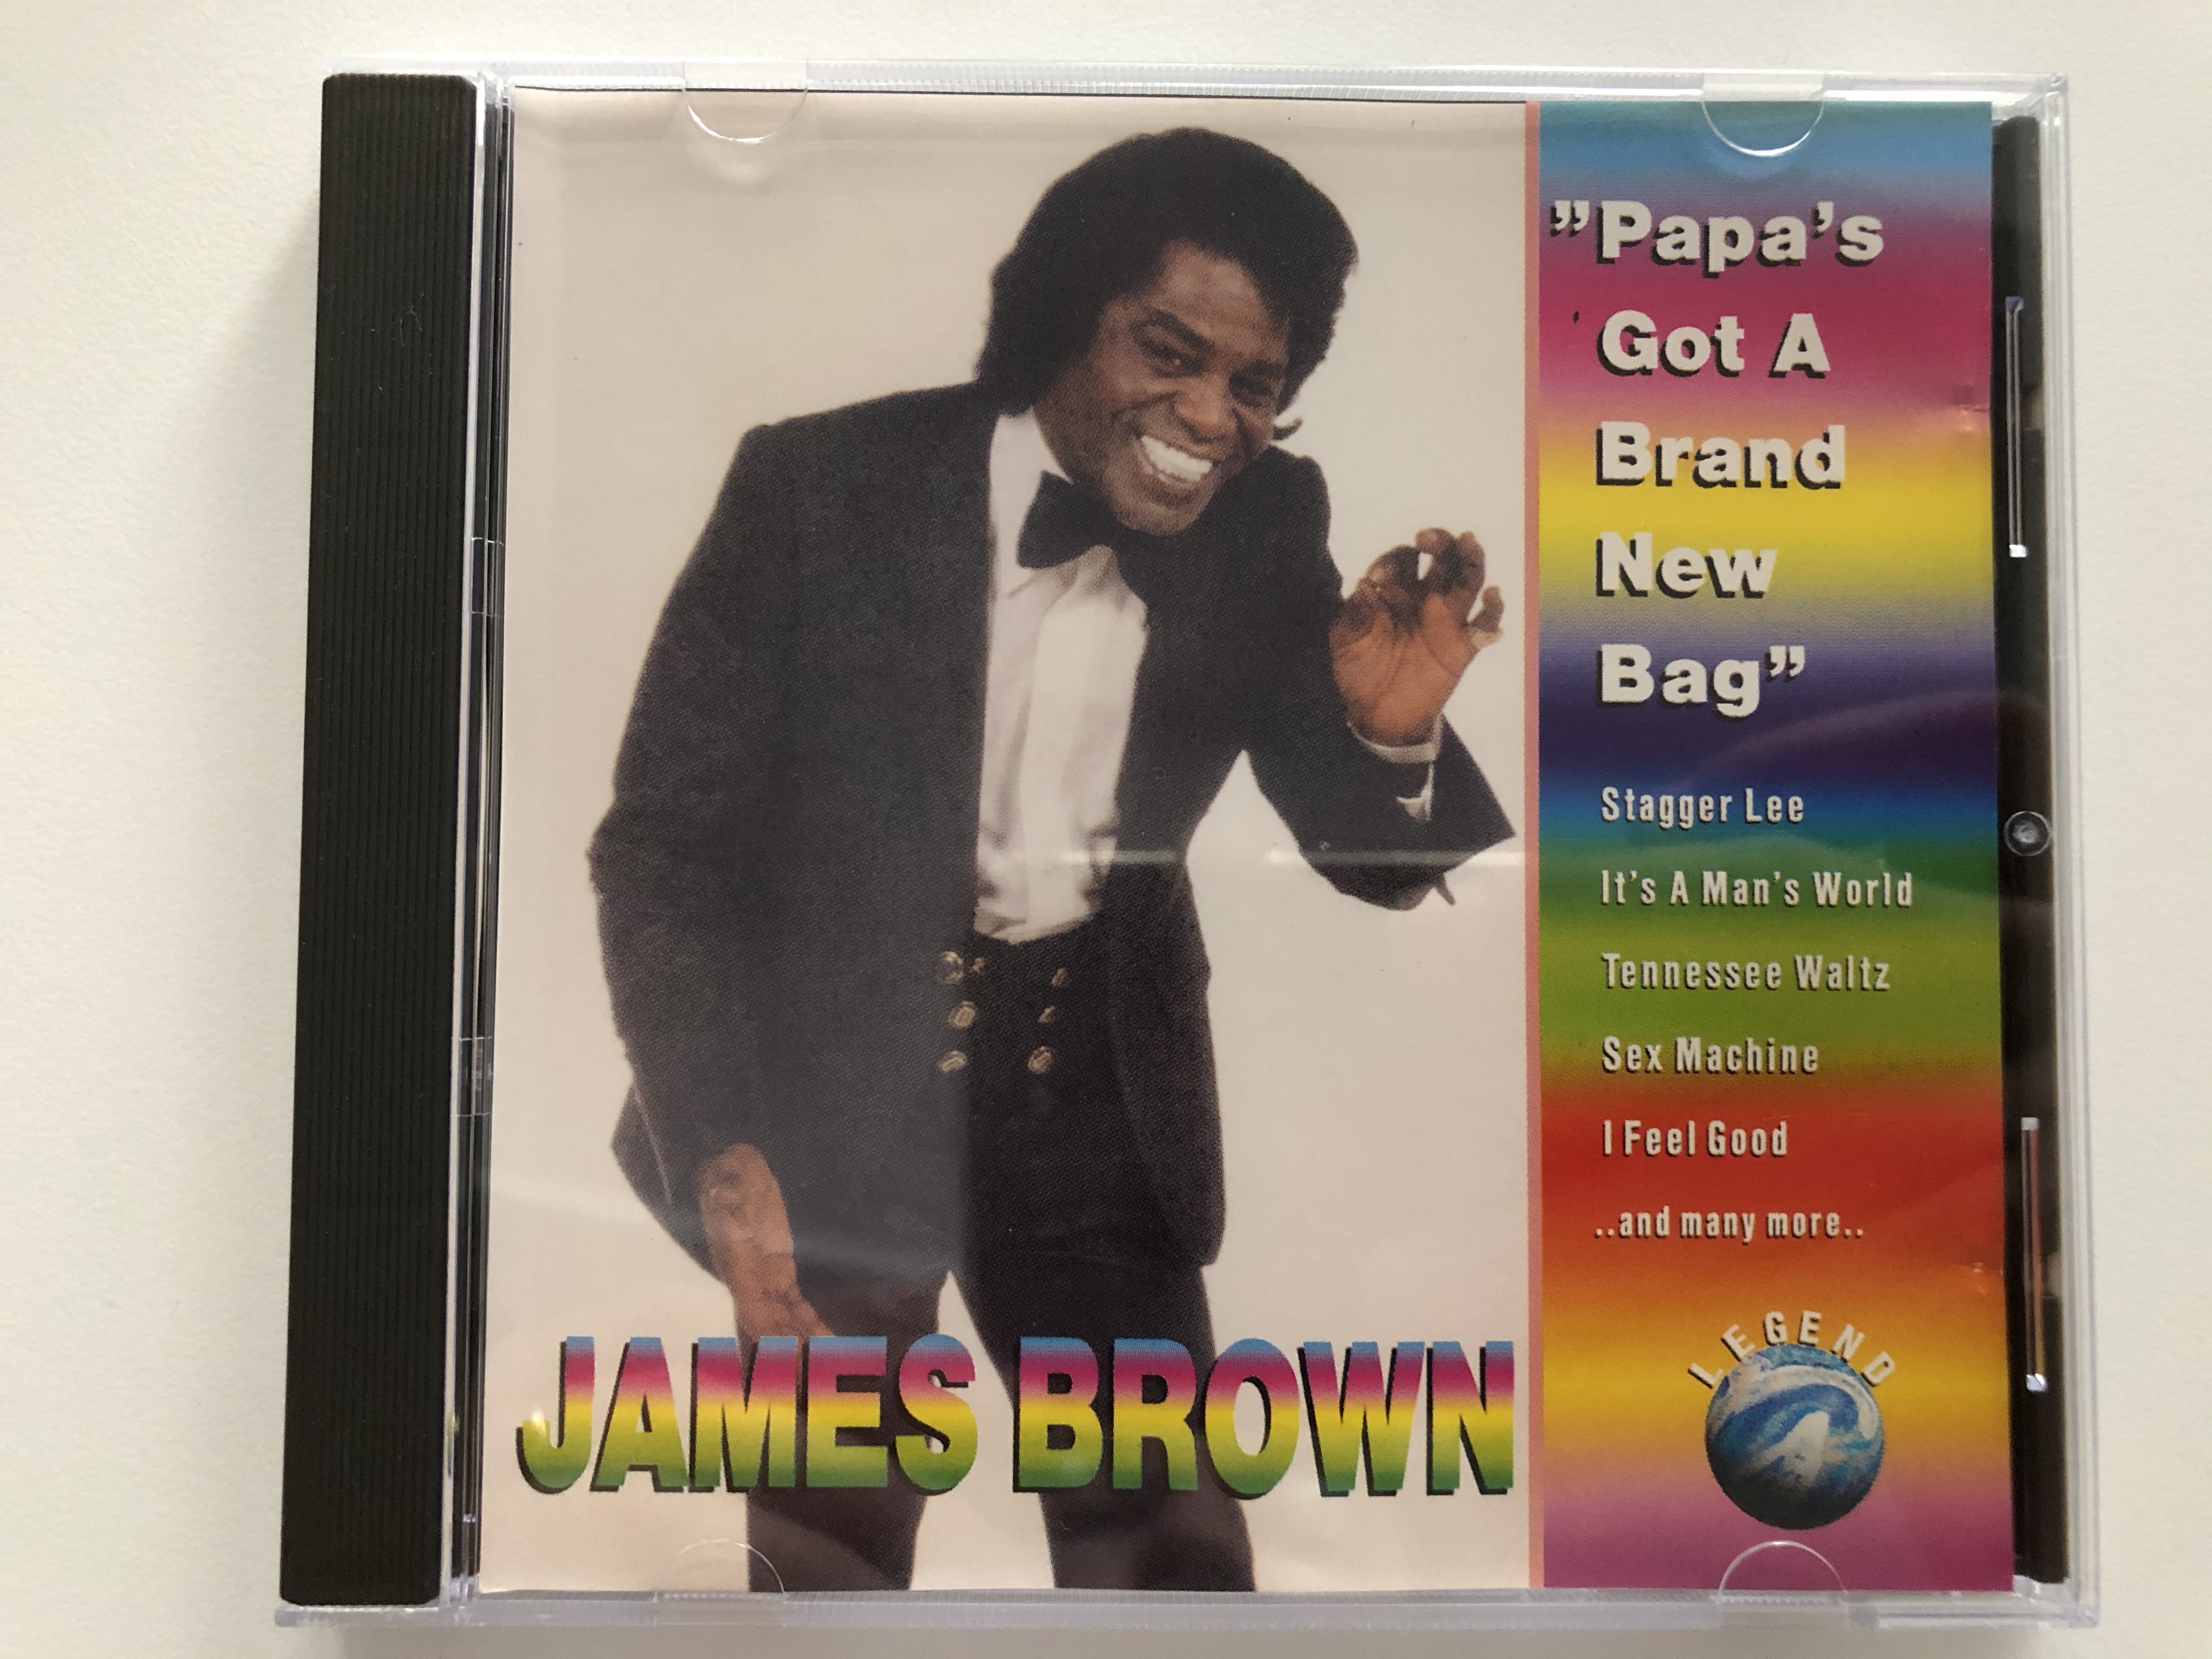 james-brown-papa-s-got-a-brand-new-bag-stagger-lee-it-s-a-man-s-world-tennessee-waltz-sex-machine-i-feel-good-and-many-more...-legend-audio-cd-1993-wz-90003-1-.jpg